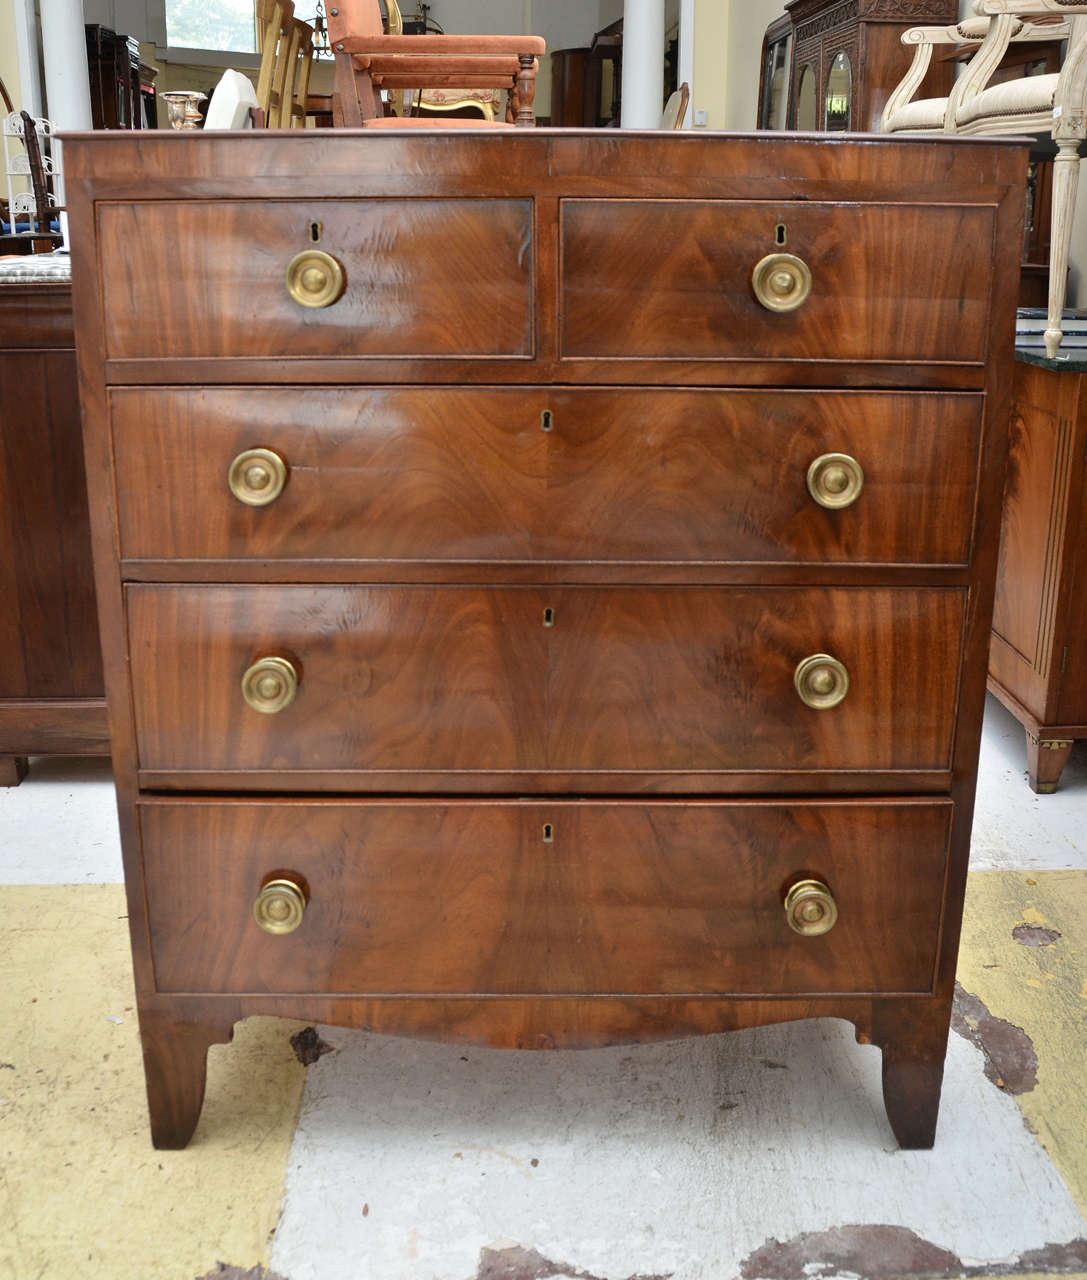 Early 19 Th C. American Narrow Chest of Drawers With Beautifully Patinated Flame Mahogany Veneered Front & Solid Mahogany Sides & Top. Original Round Brass Pulls. Base with Bracket Feet Centered by A Swaged Apron. Back With Penciled Inscription Mary